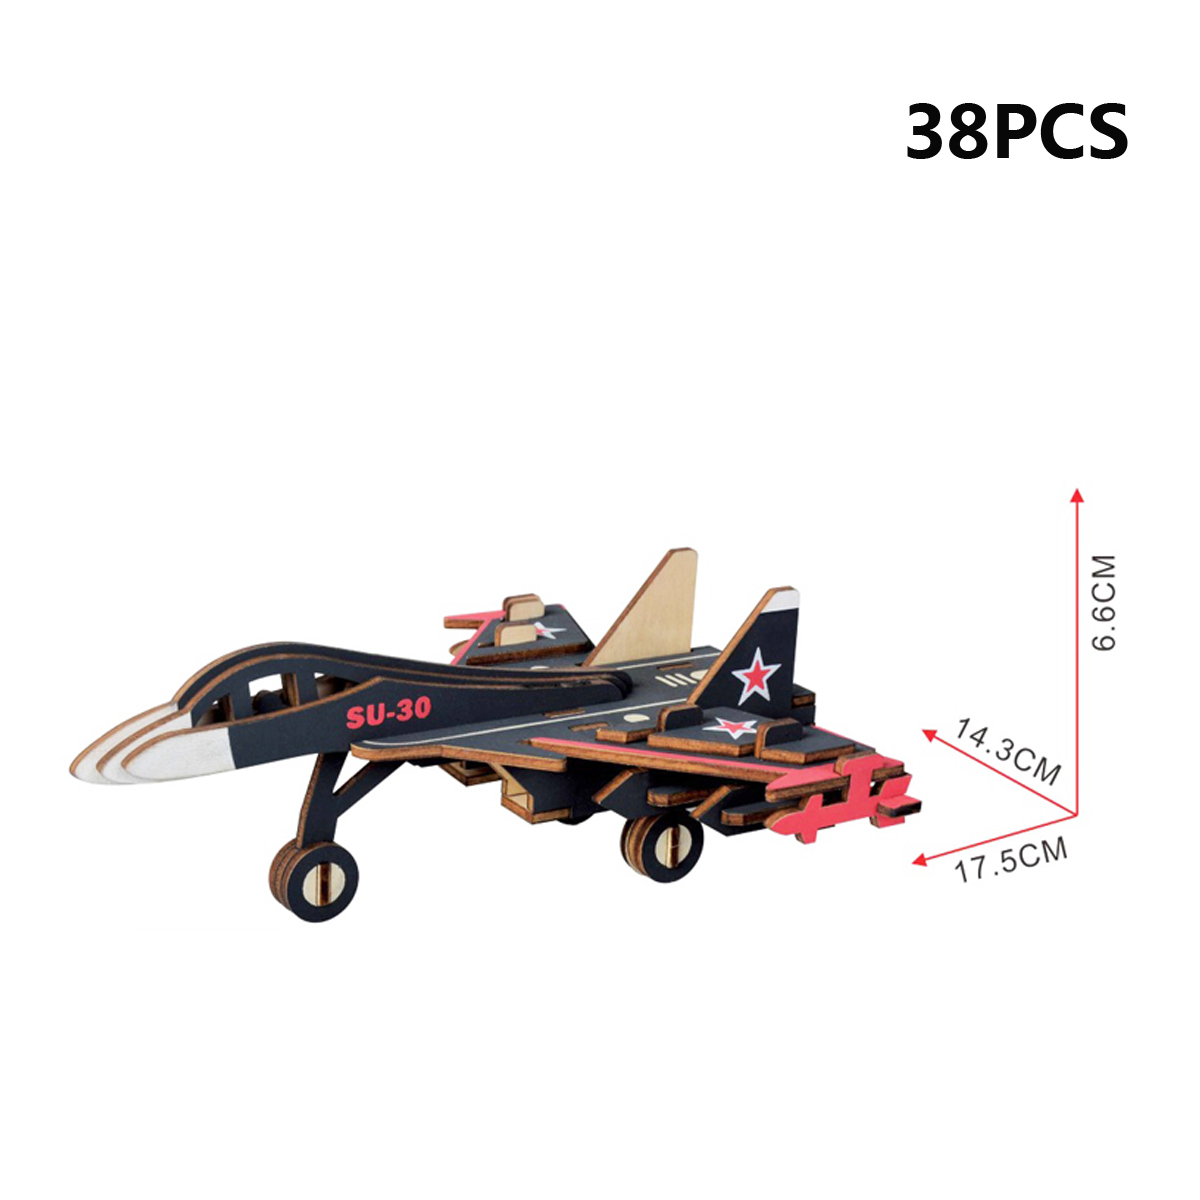 3D-Woodcraft-Assembly-Western-Fighter-Series-Kit-Jigsaw-Puzzle-Decoration-Toy-Model-for-Kids-Gift-1632732-6